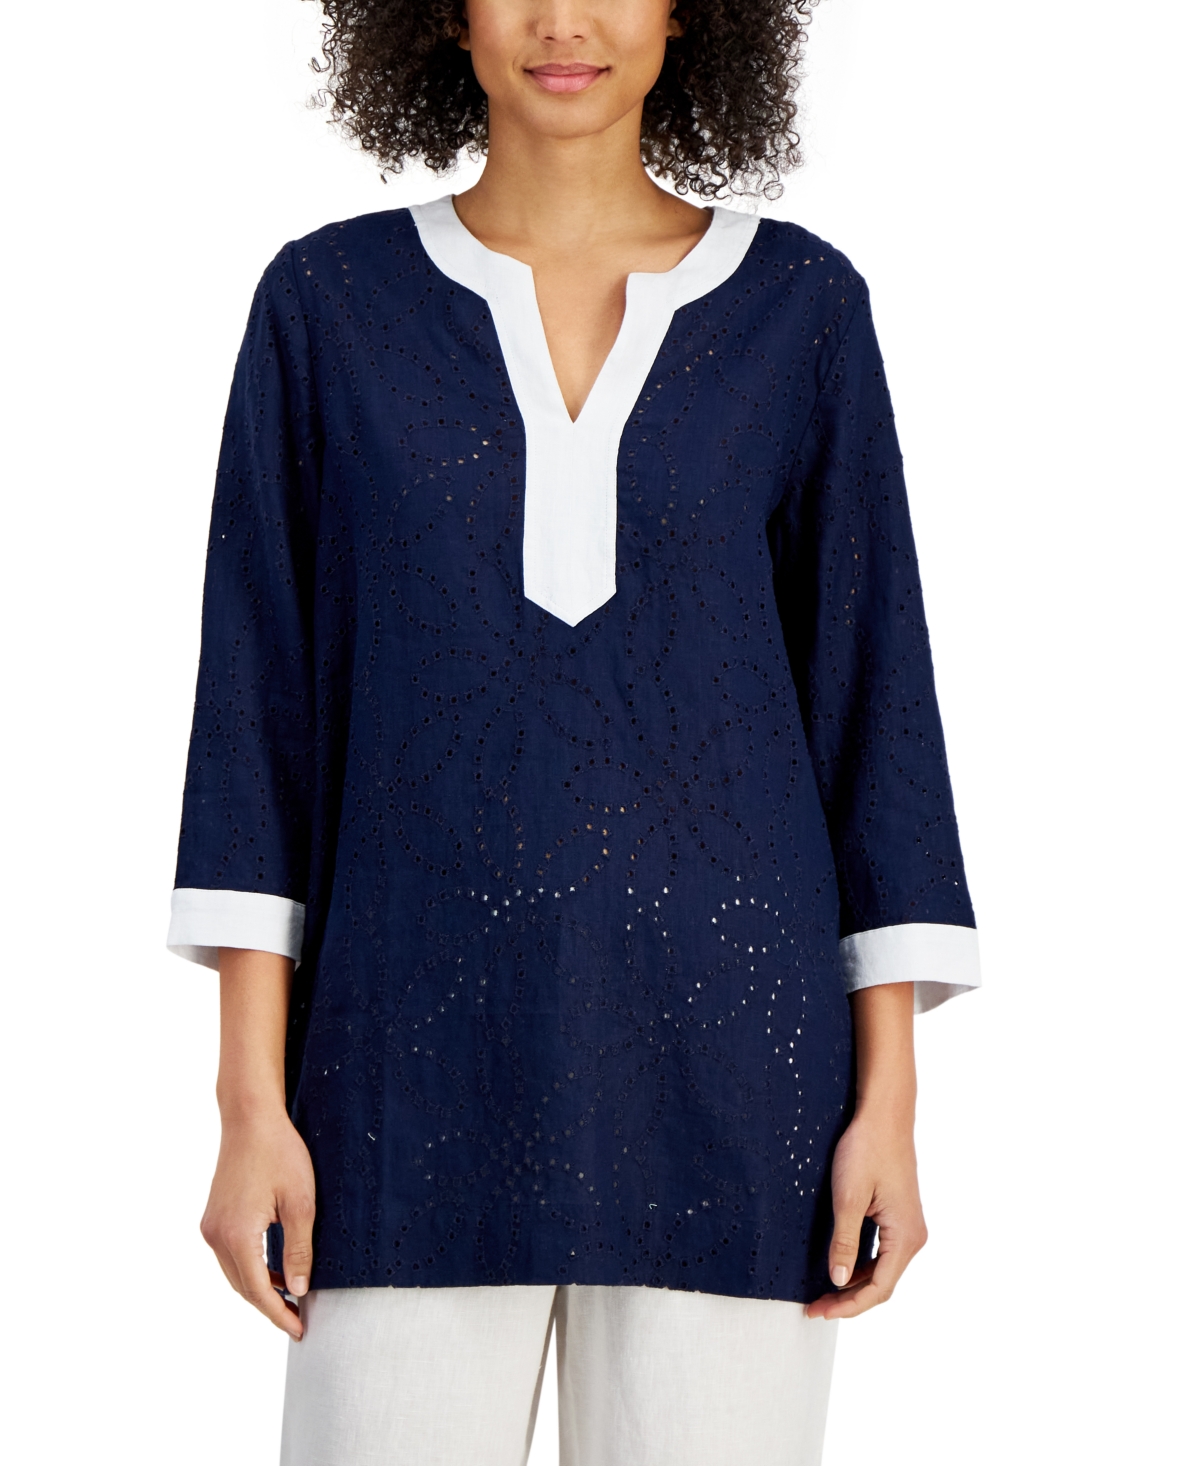 Linen Petite Colorblocked Eyelet 3/4 Sleeve Splitneck Linen Tunic Top, Created for Macy's - Intrepid Blue